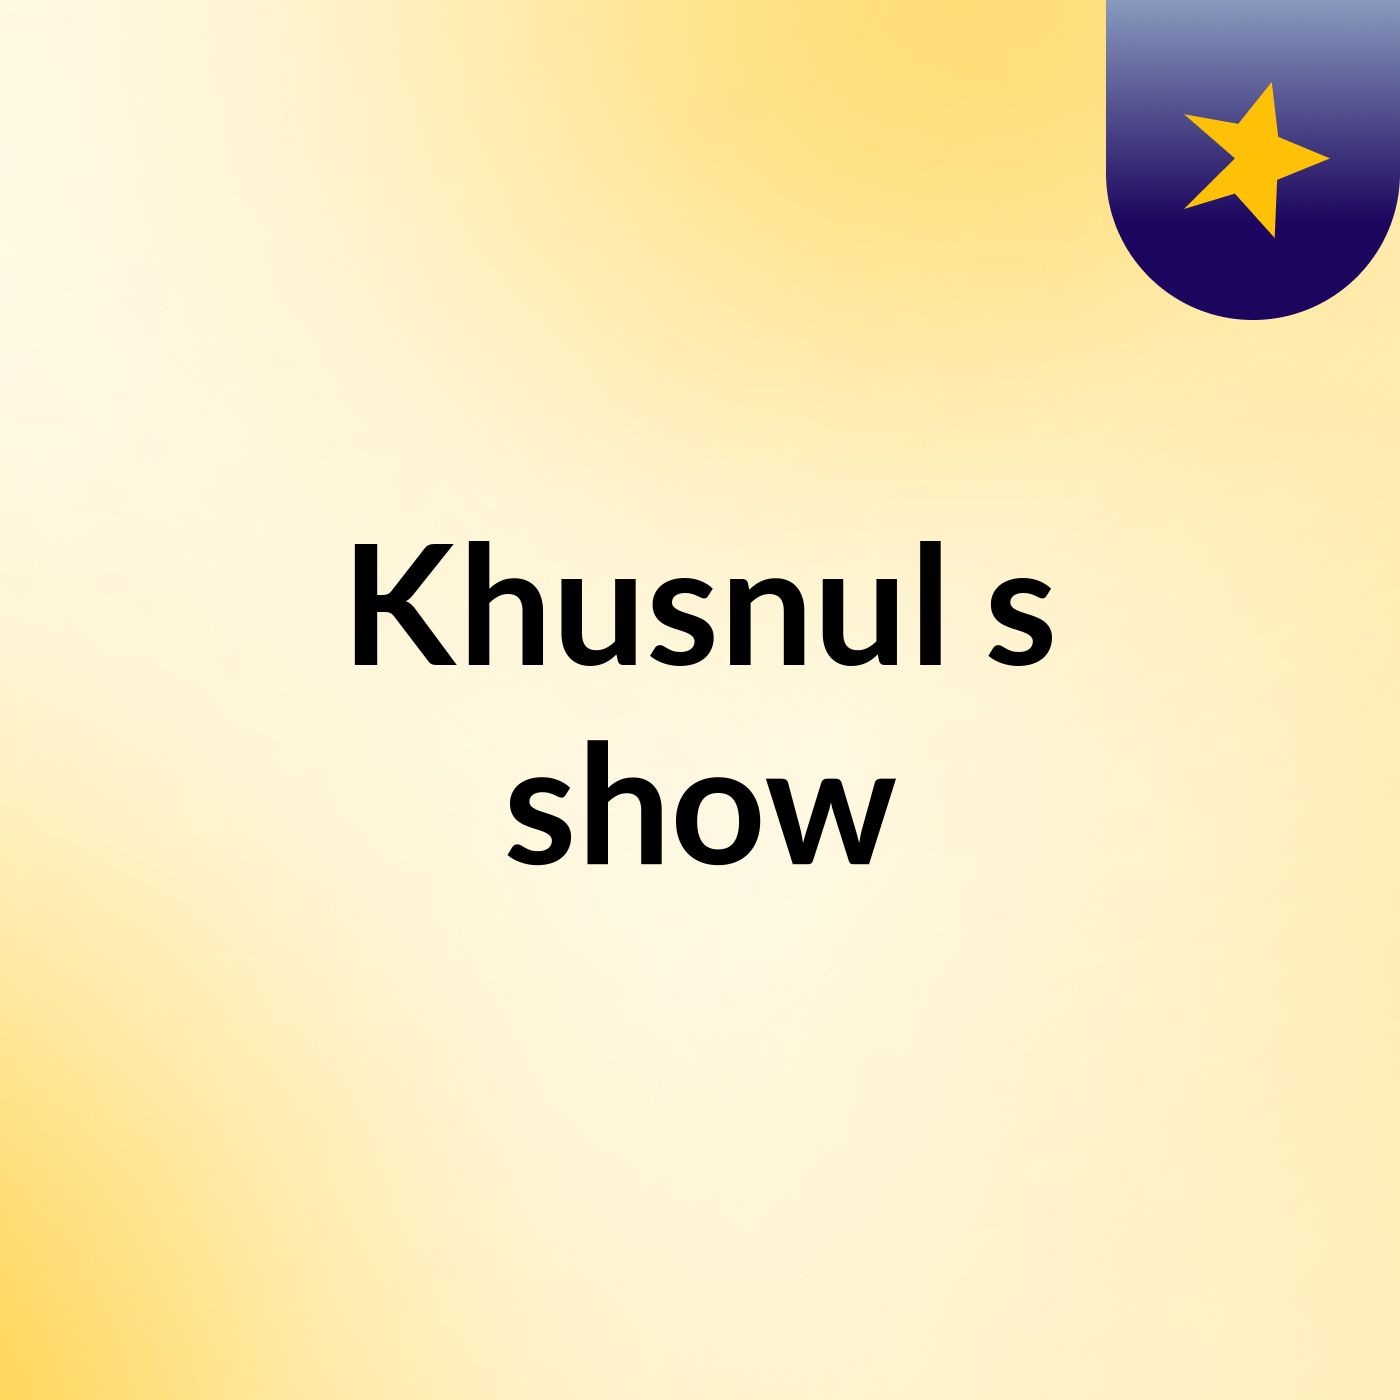 Khusnul's show